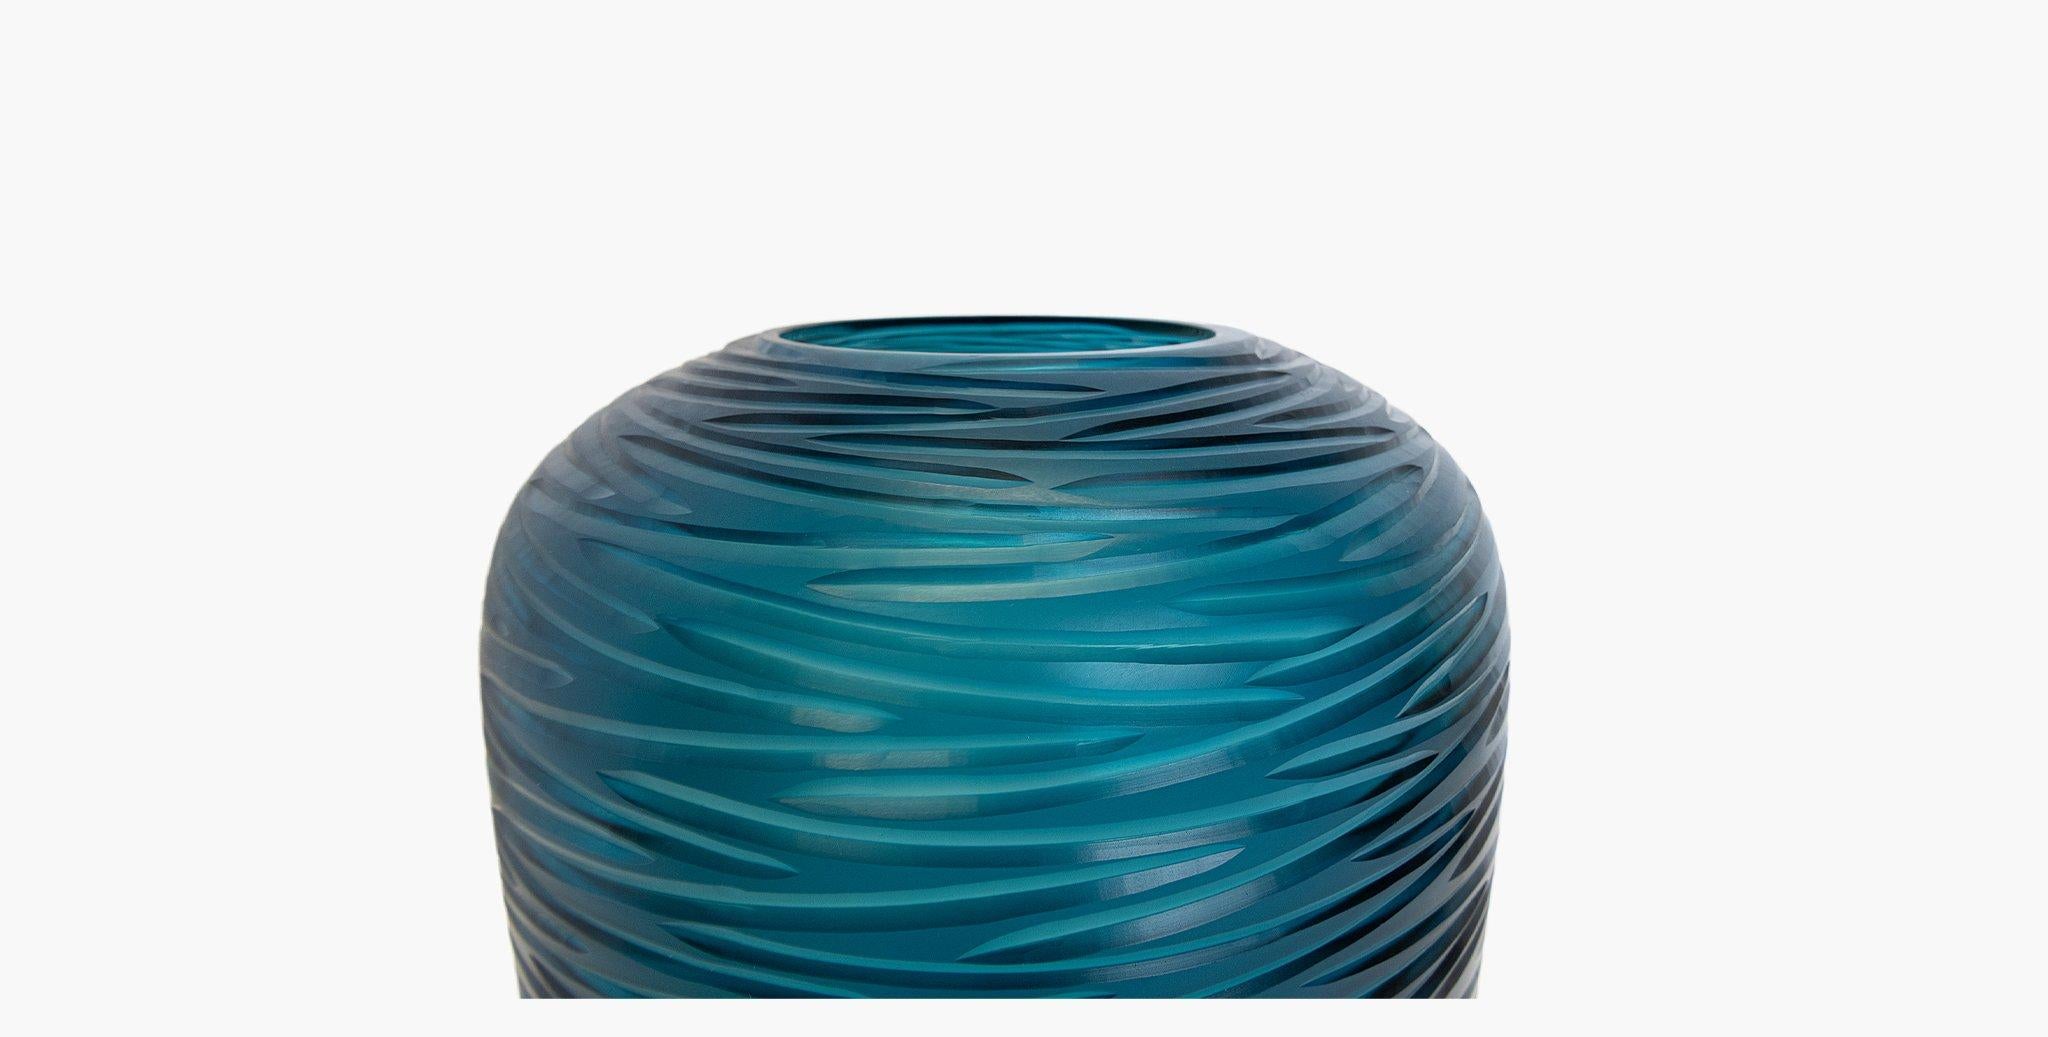 Our Zado vase is handblown by master glass artisans then etched to create the beautiful organic embossed pattern on the vase. A perfect addition to any vignette.

Clay cut
 